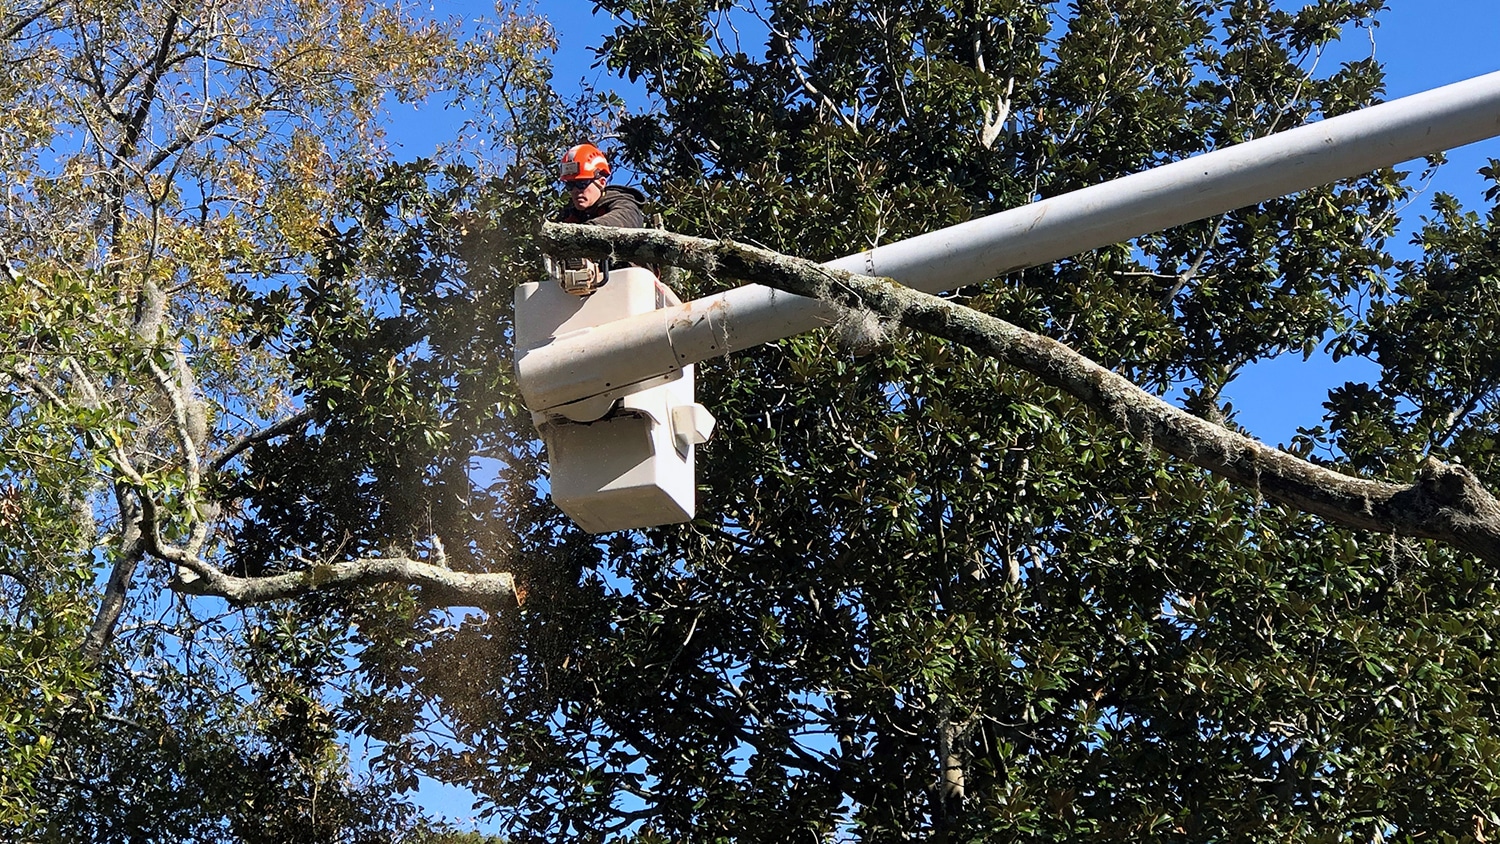 Kelly Blair in a bucket truck, trimming a tree branch with a chain saw.